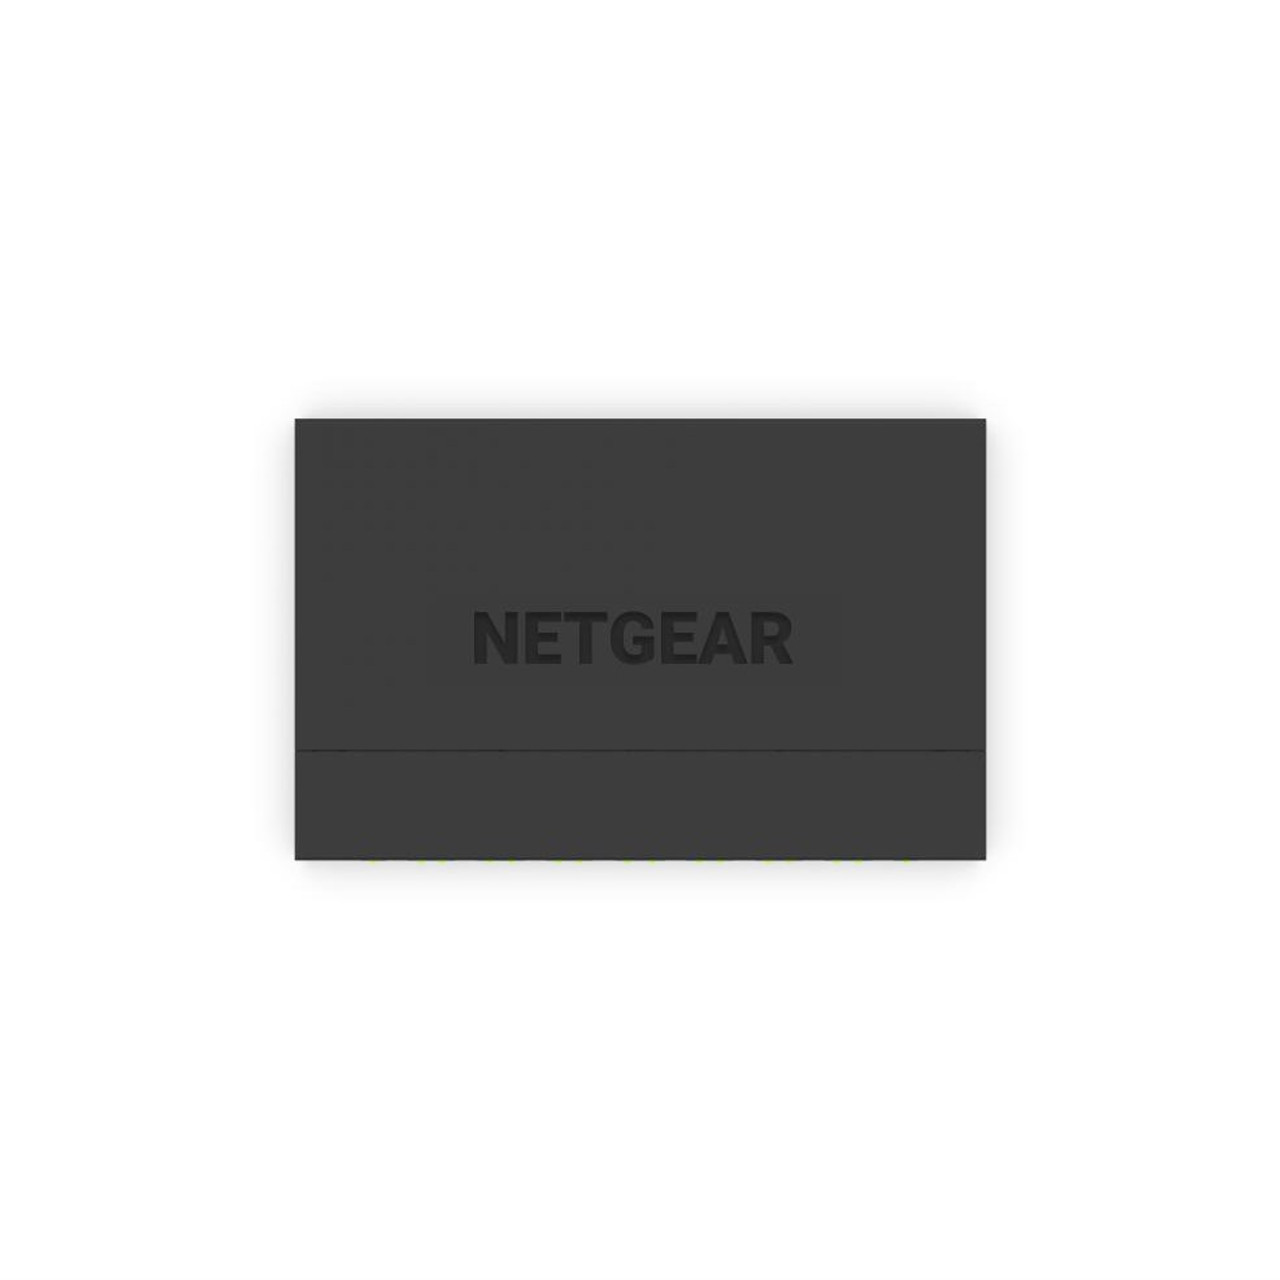 Netgear M4300-8X8F 8x10G Layer 3 Stackable Managed Switch with 8x10G SFP